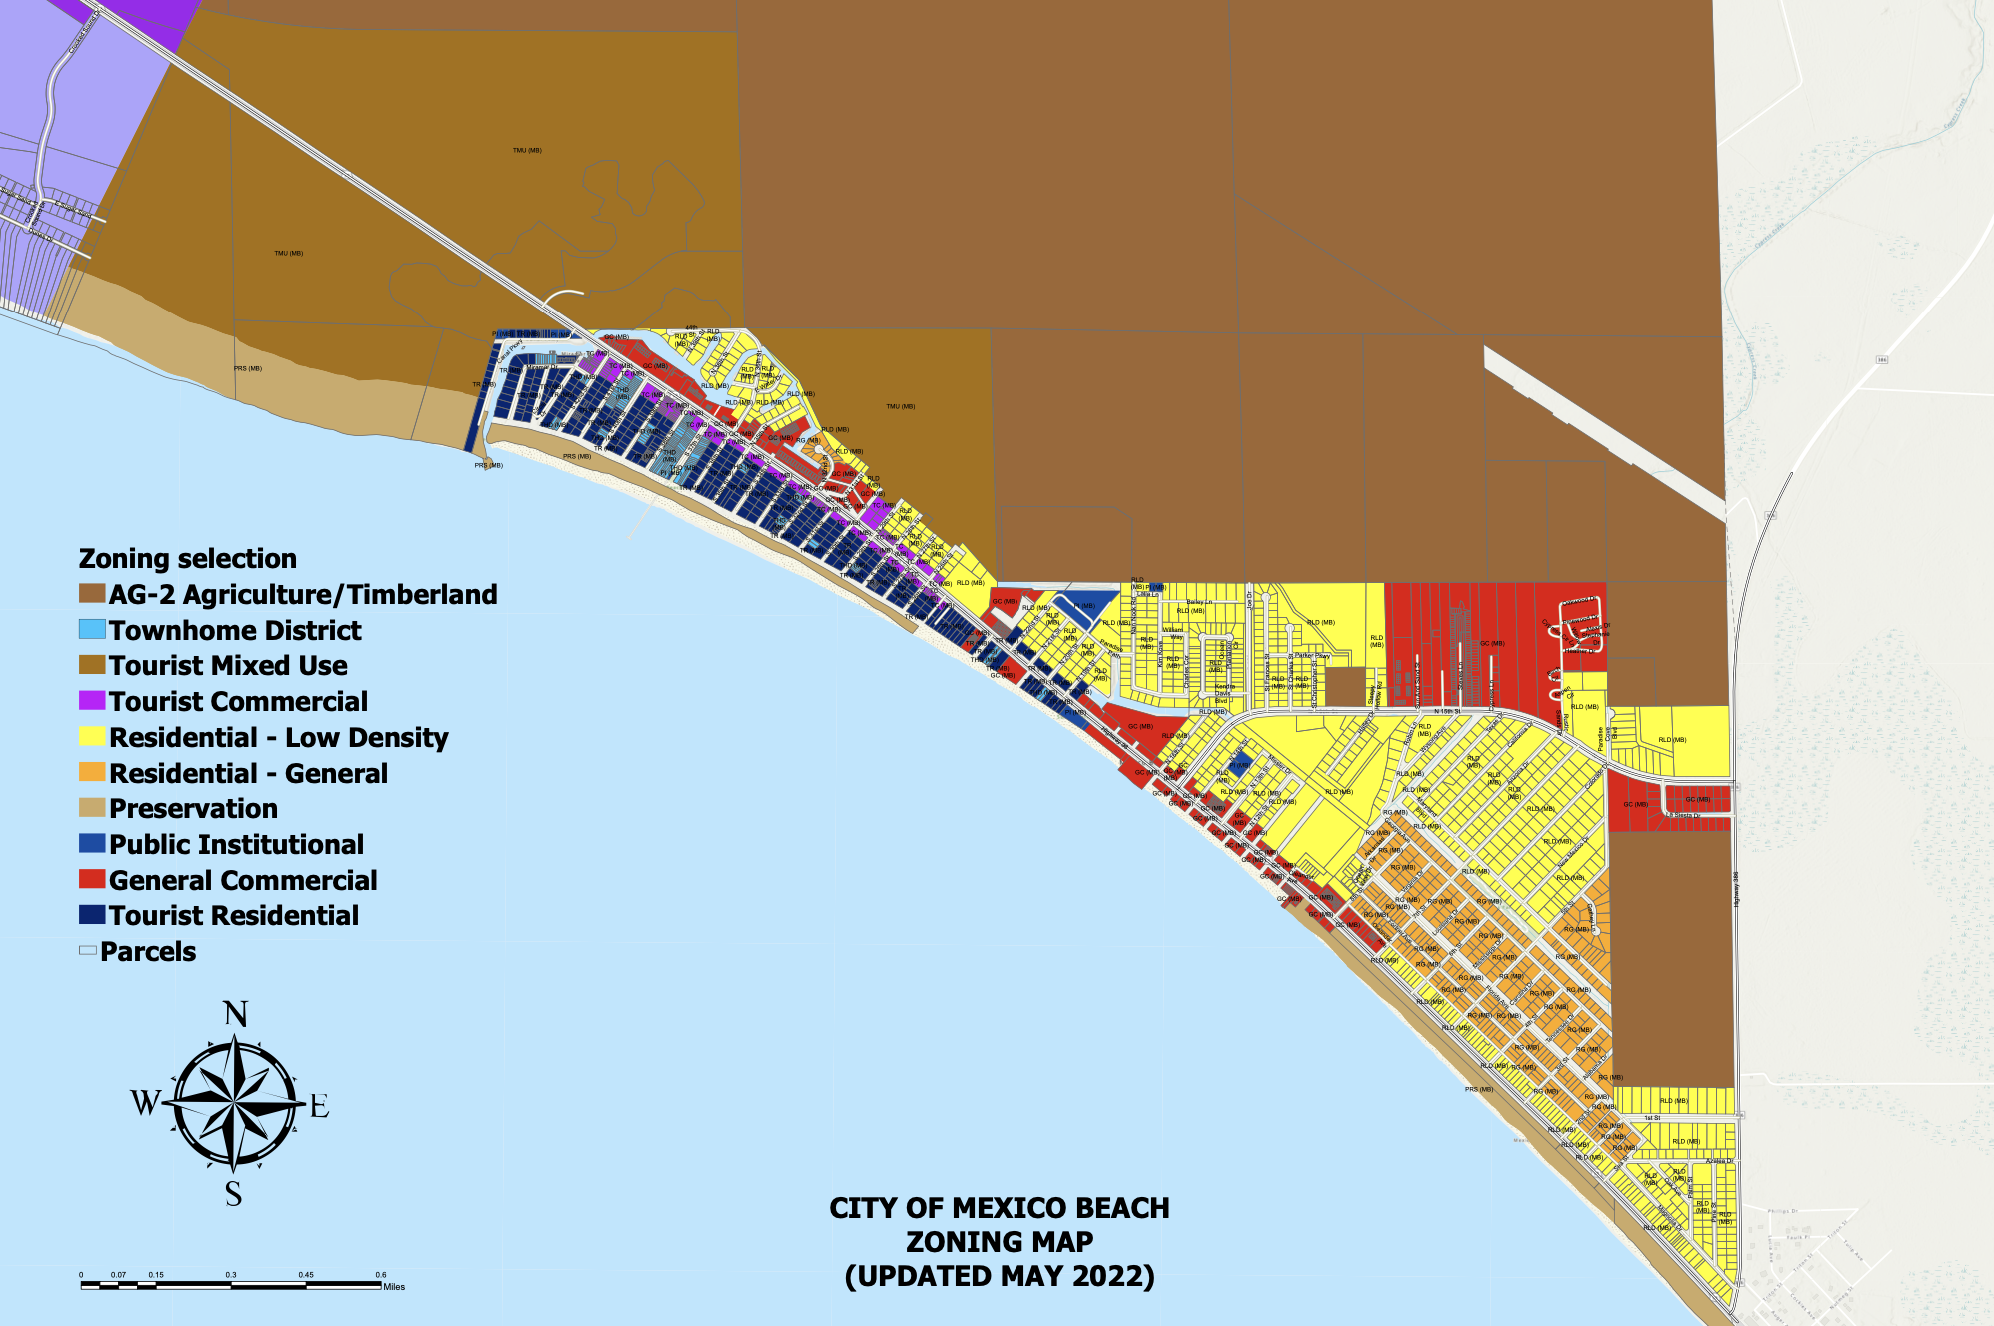 Planning and Zoning map of Mexico Beach, Florida